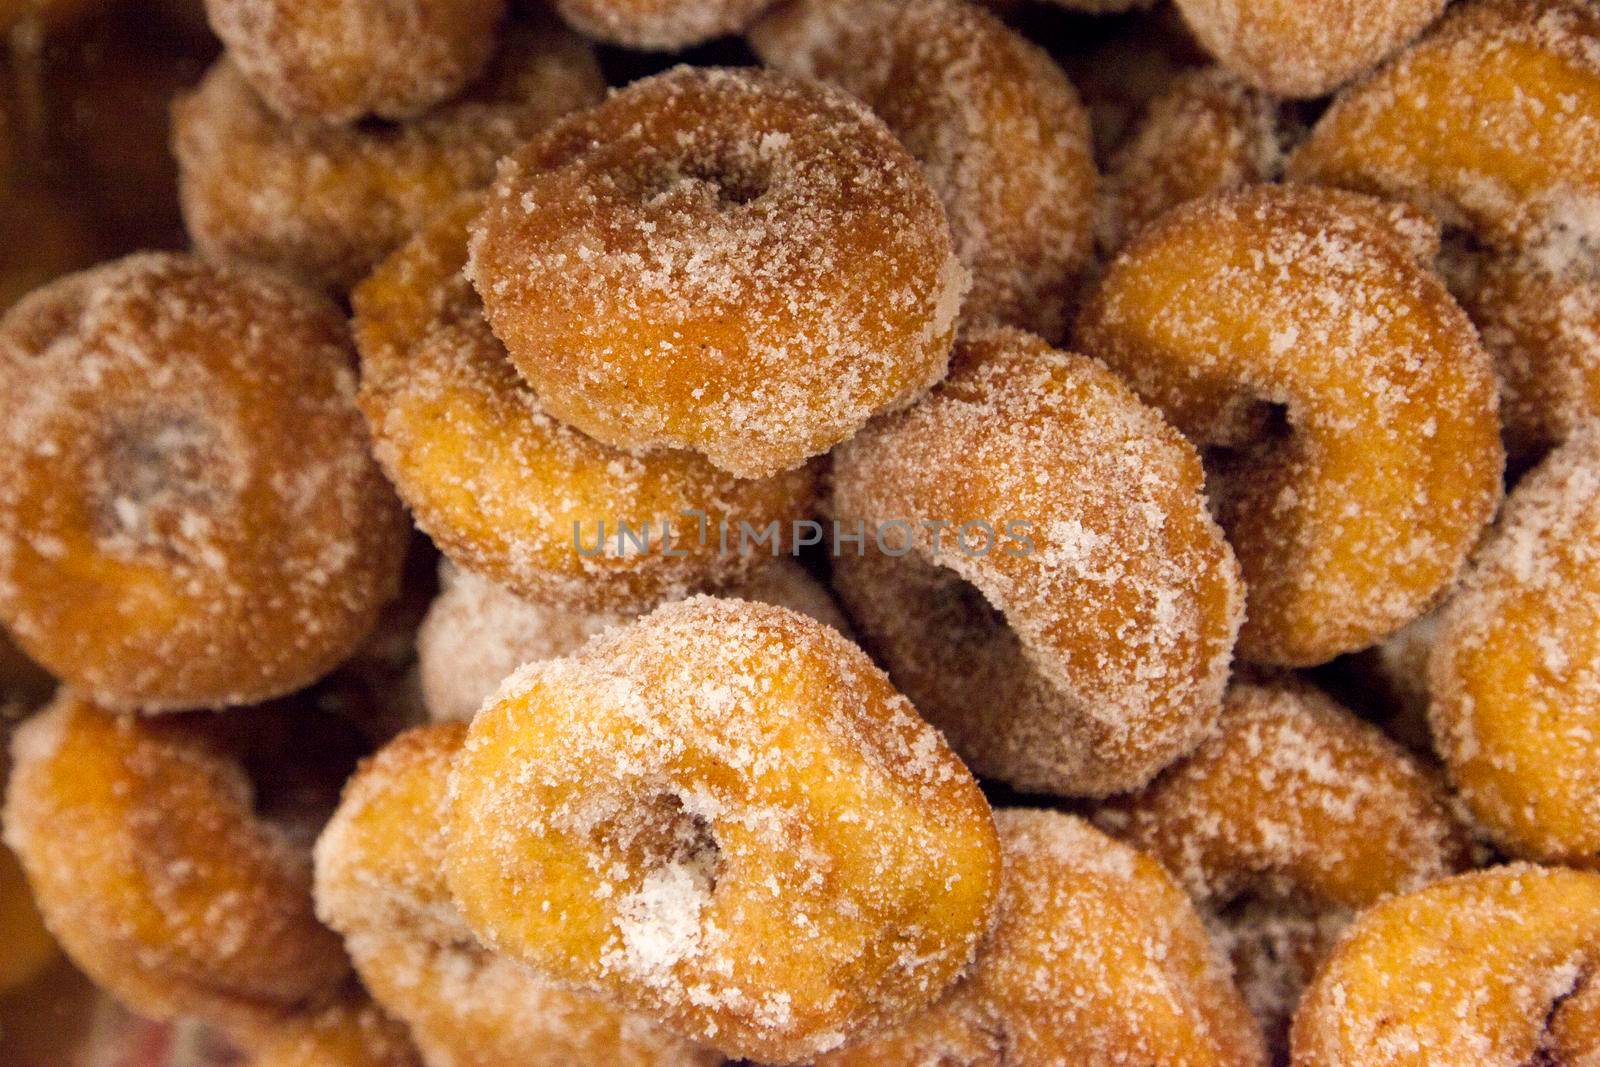  a batch of freshly baked sugar donuts 